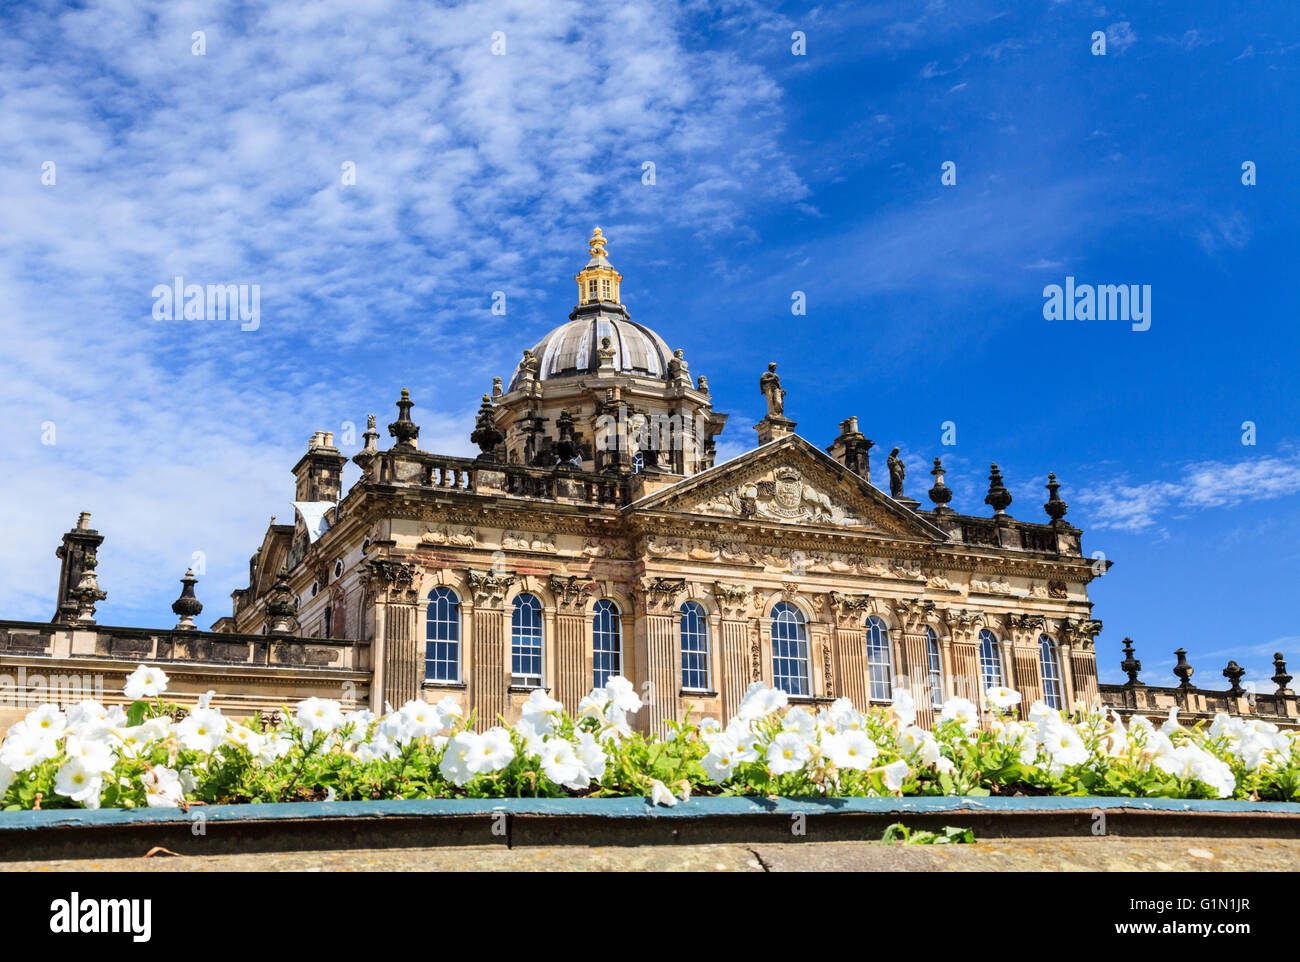 A south view of Castle Howard, Yorkshire, England Stock Photo